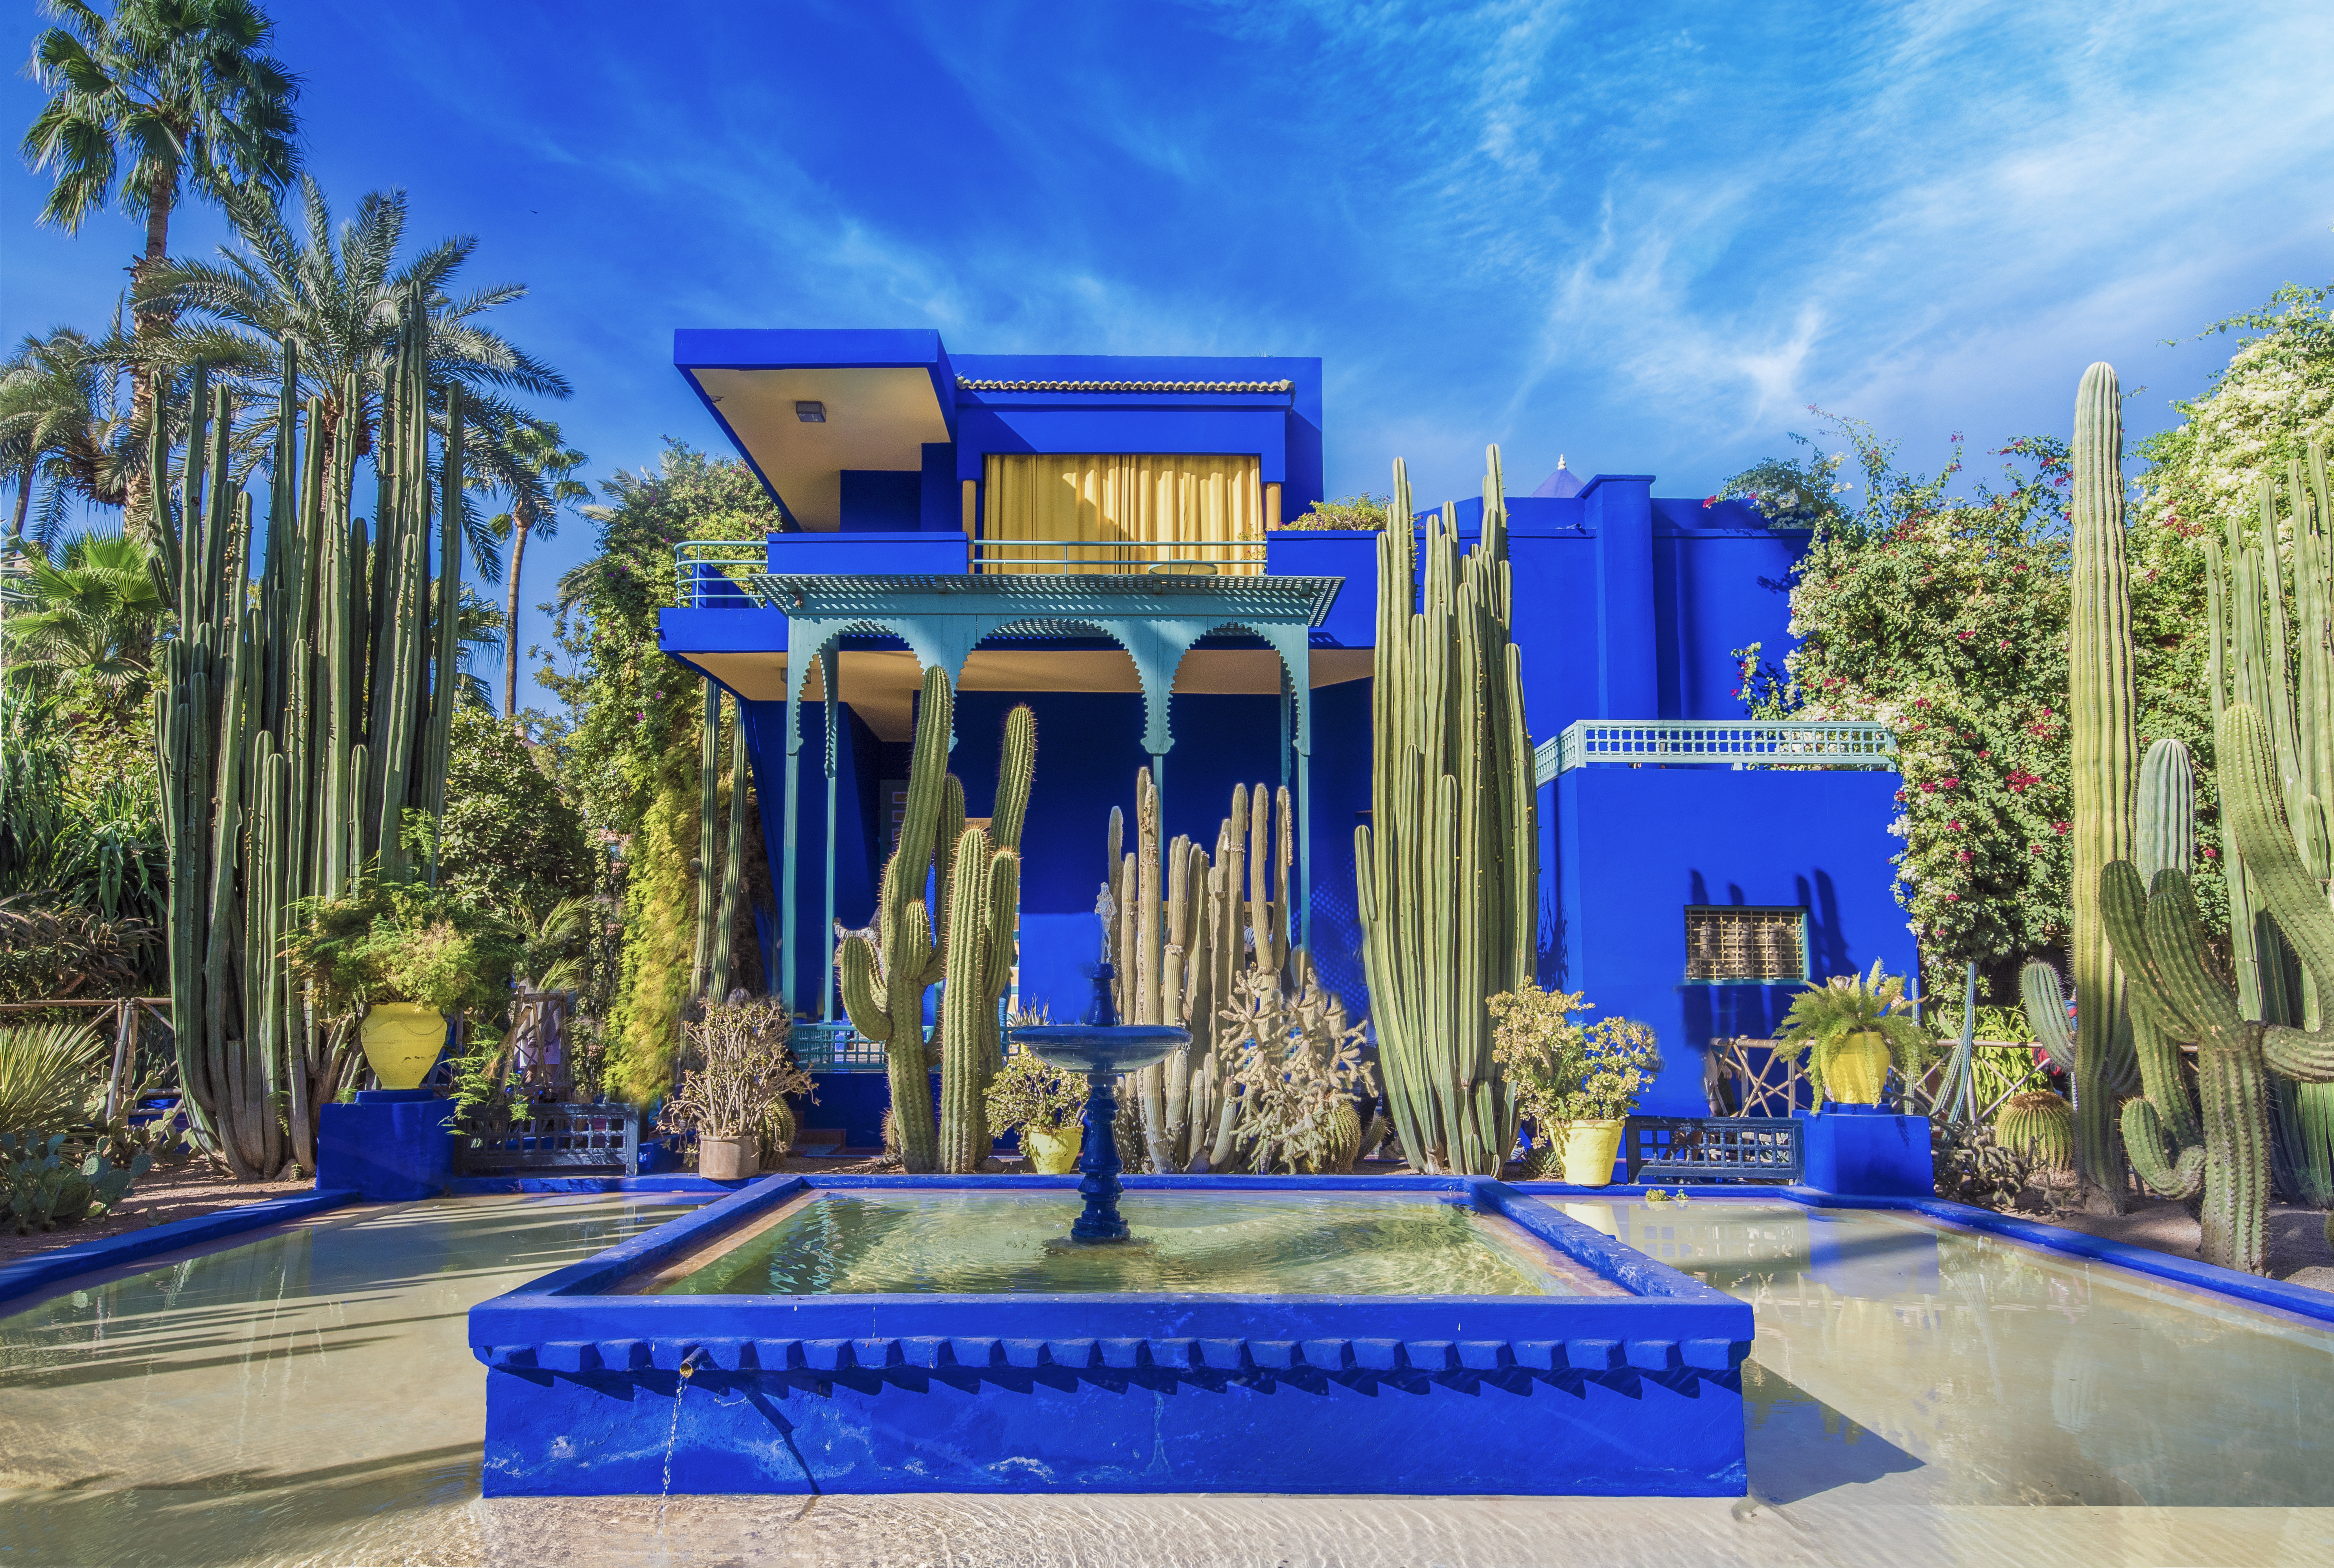 This image is of the Majorelle Garden and Yves Saint Laurant home in Marrakech, Morocco.  The home is a vibrant blue and features a large, square fountain in front of it. 